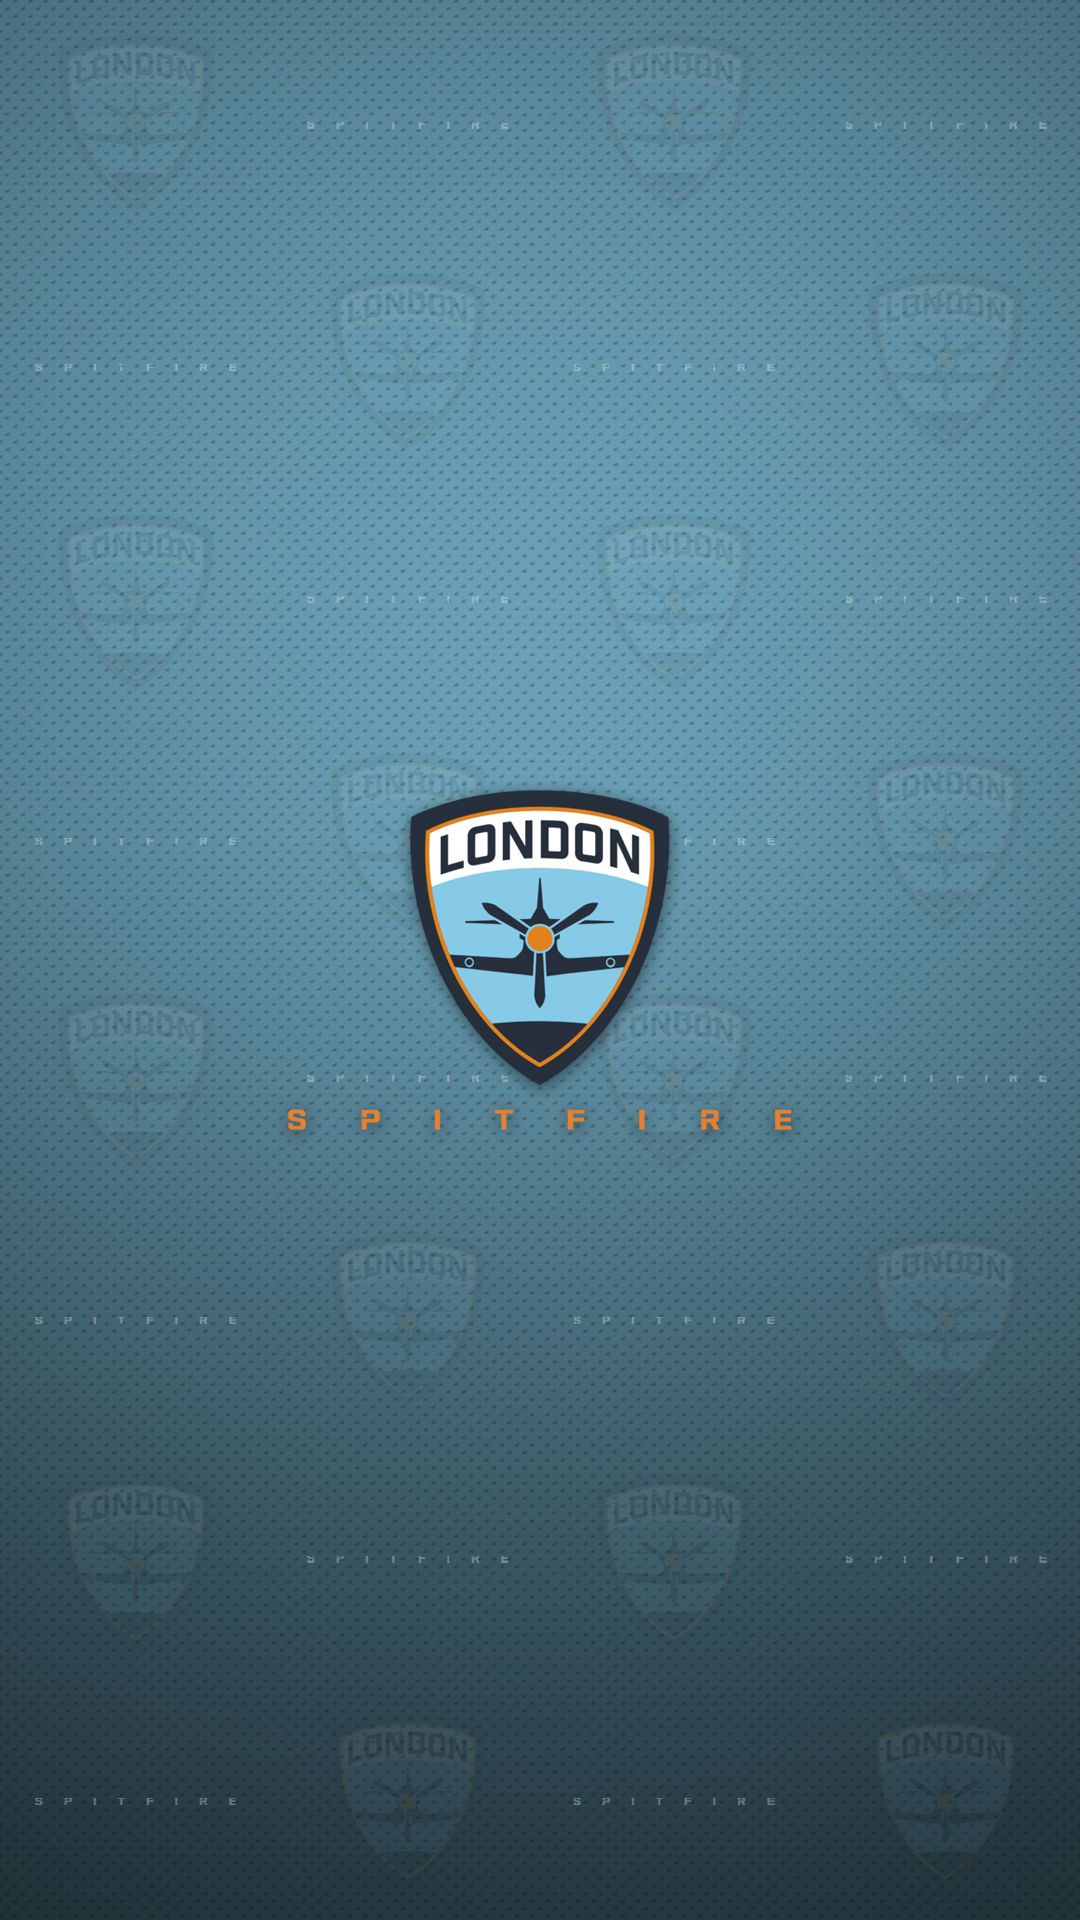 London Spitfire Wallpapers